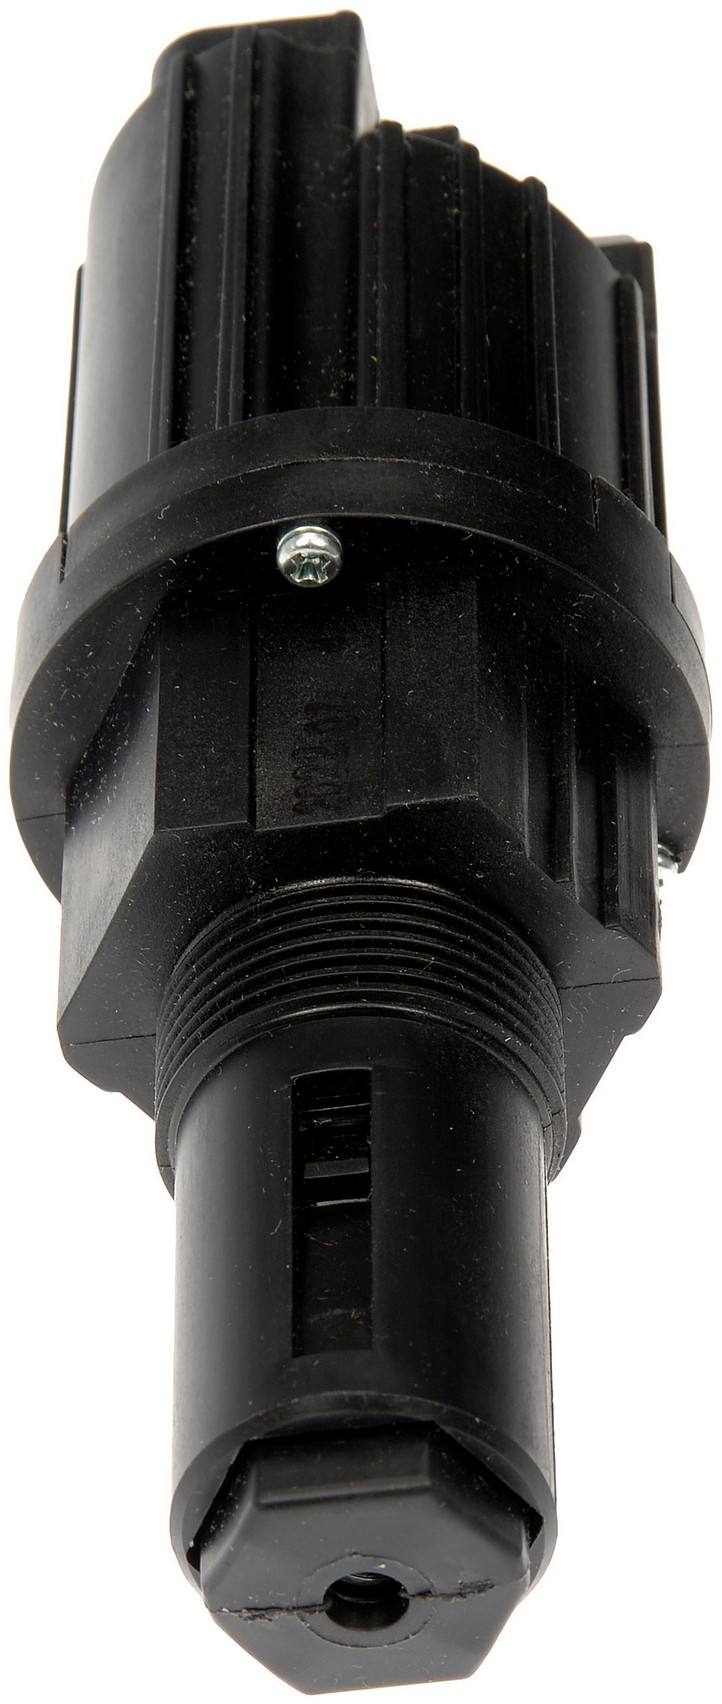 Back View of 4WD Actuator DORMAN 600-101